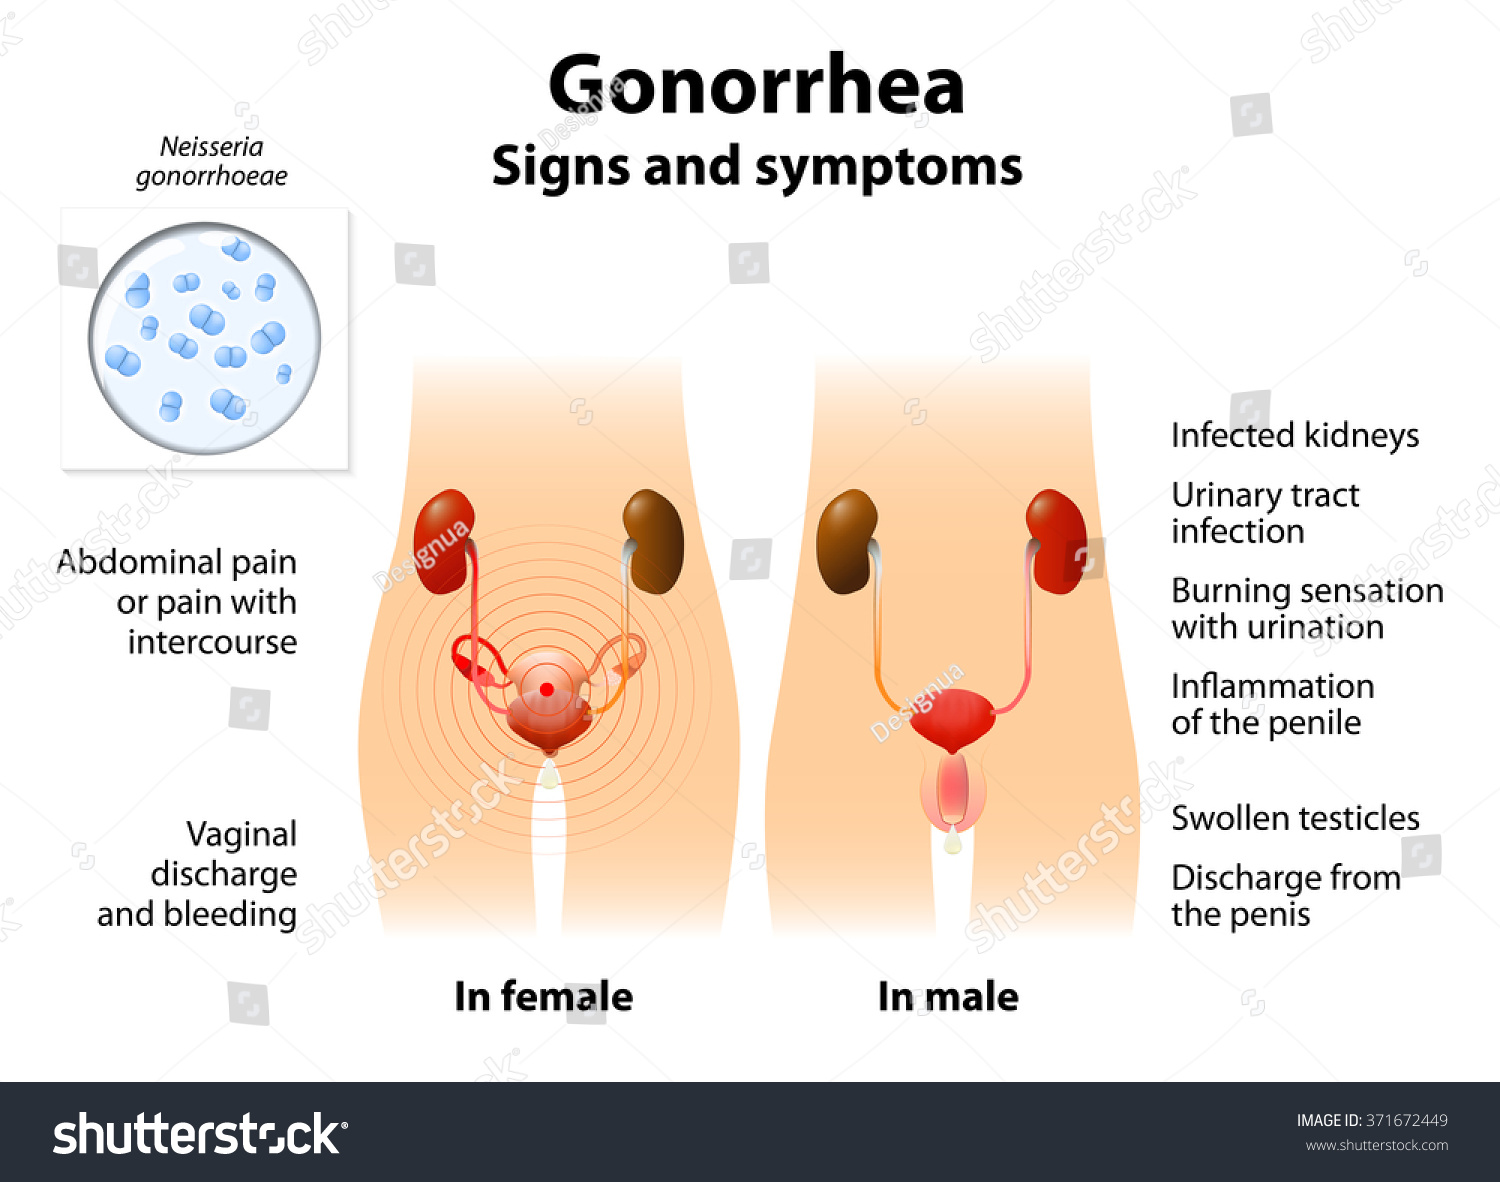 Gonorrhea Or Gonococcal Urethritis. Sexually Transmitted Infection That Is Caused By ...1500 x 1182